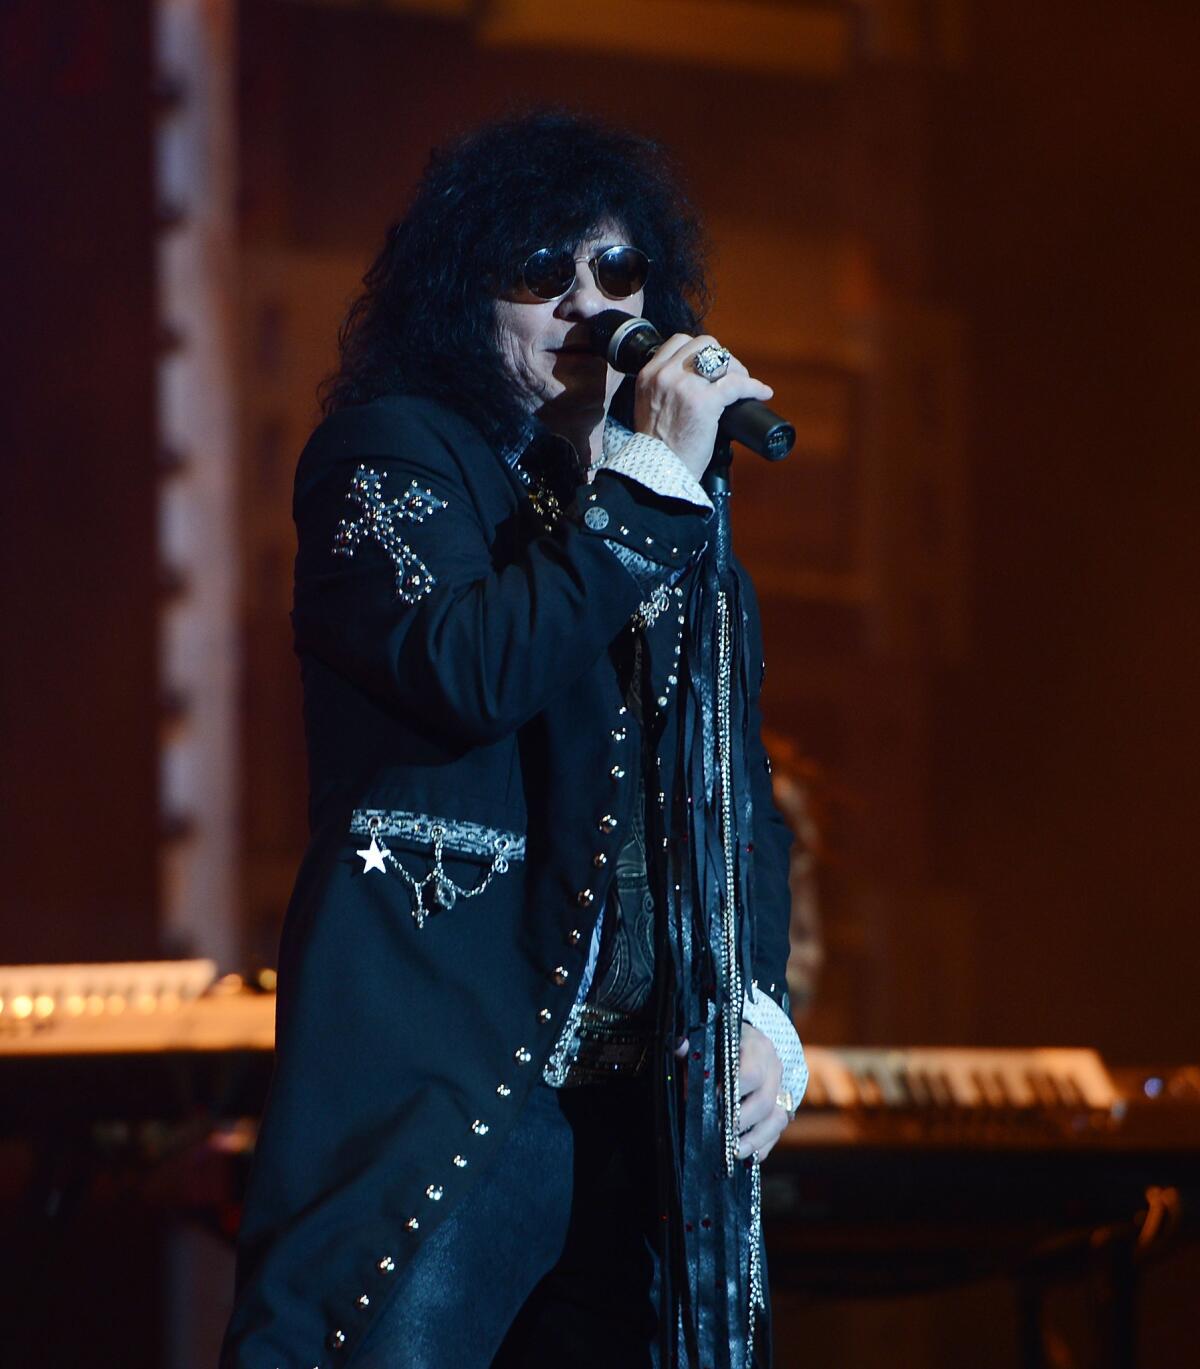 Want to get married by rocker Paul Shortino? At the Tropicana, now you can.